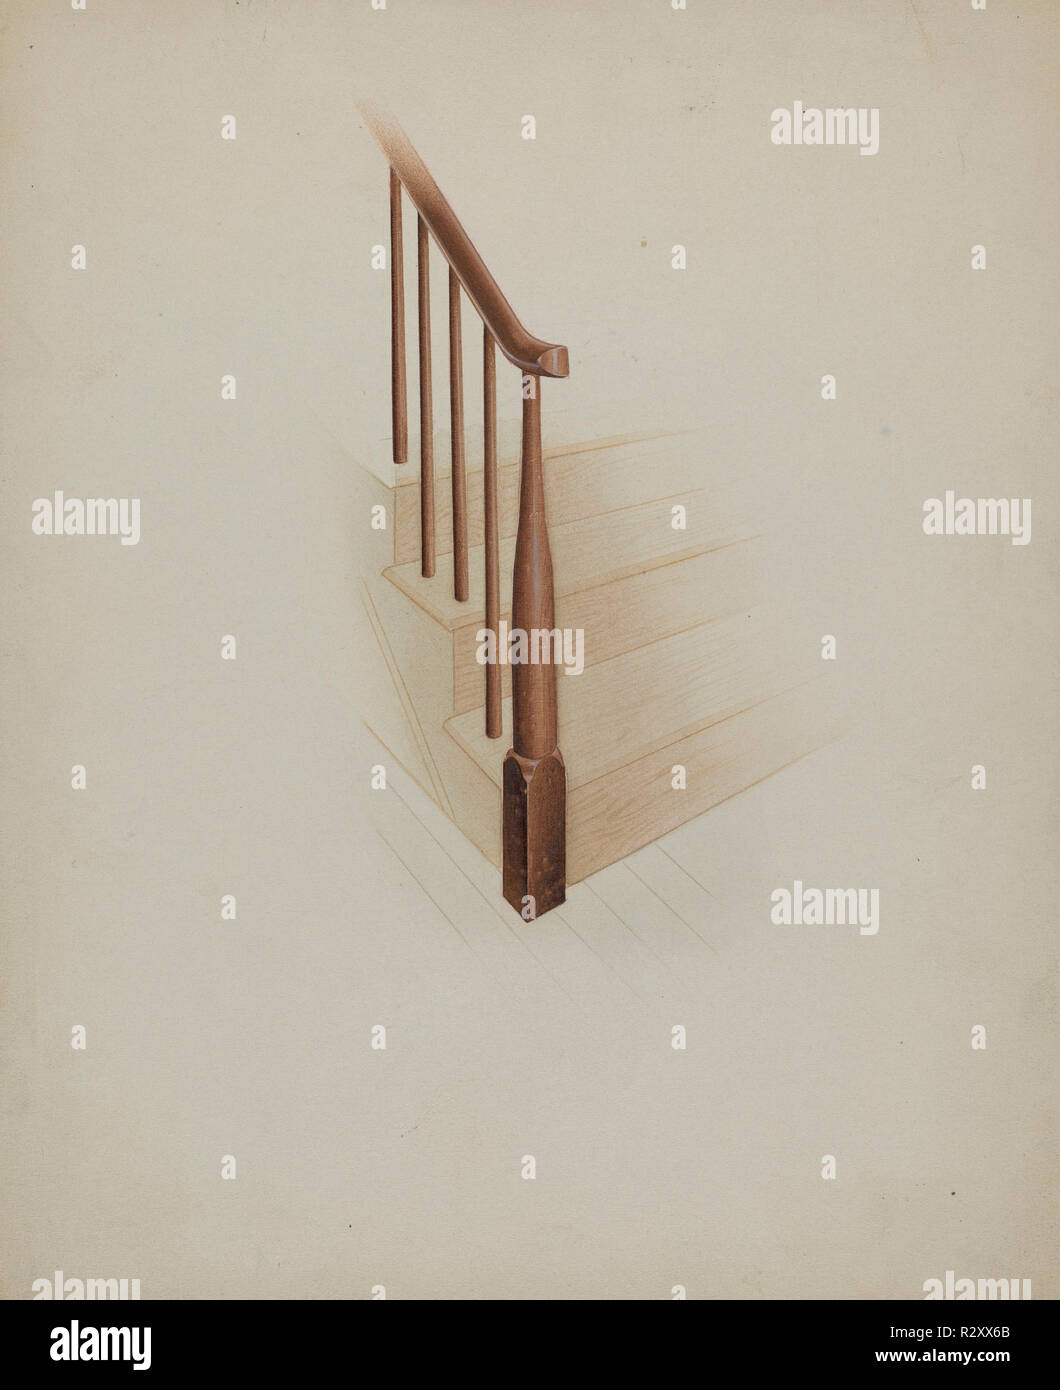 Shaker Newel Post. Dated: c. 1937. Dimensions: overall: 28 x 22.9 cm (11 x 9 in.). Medium: watercolor and graphite on paperboard. Museum: National Gallery of Art, Washington DC. Author: Anne Ger. Stock Photo